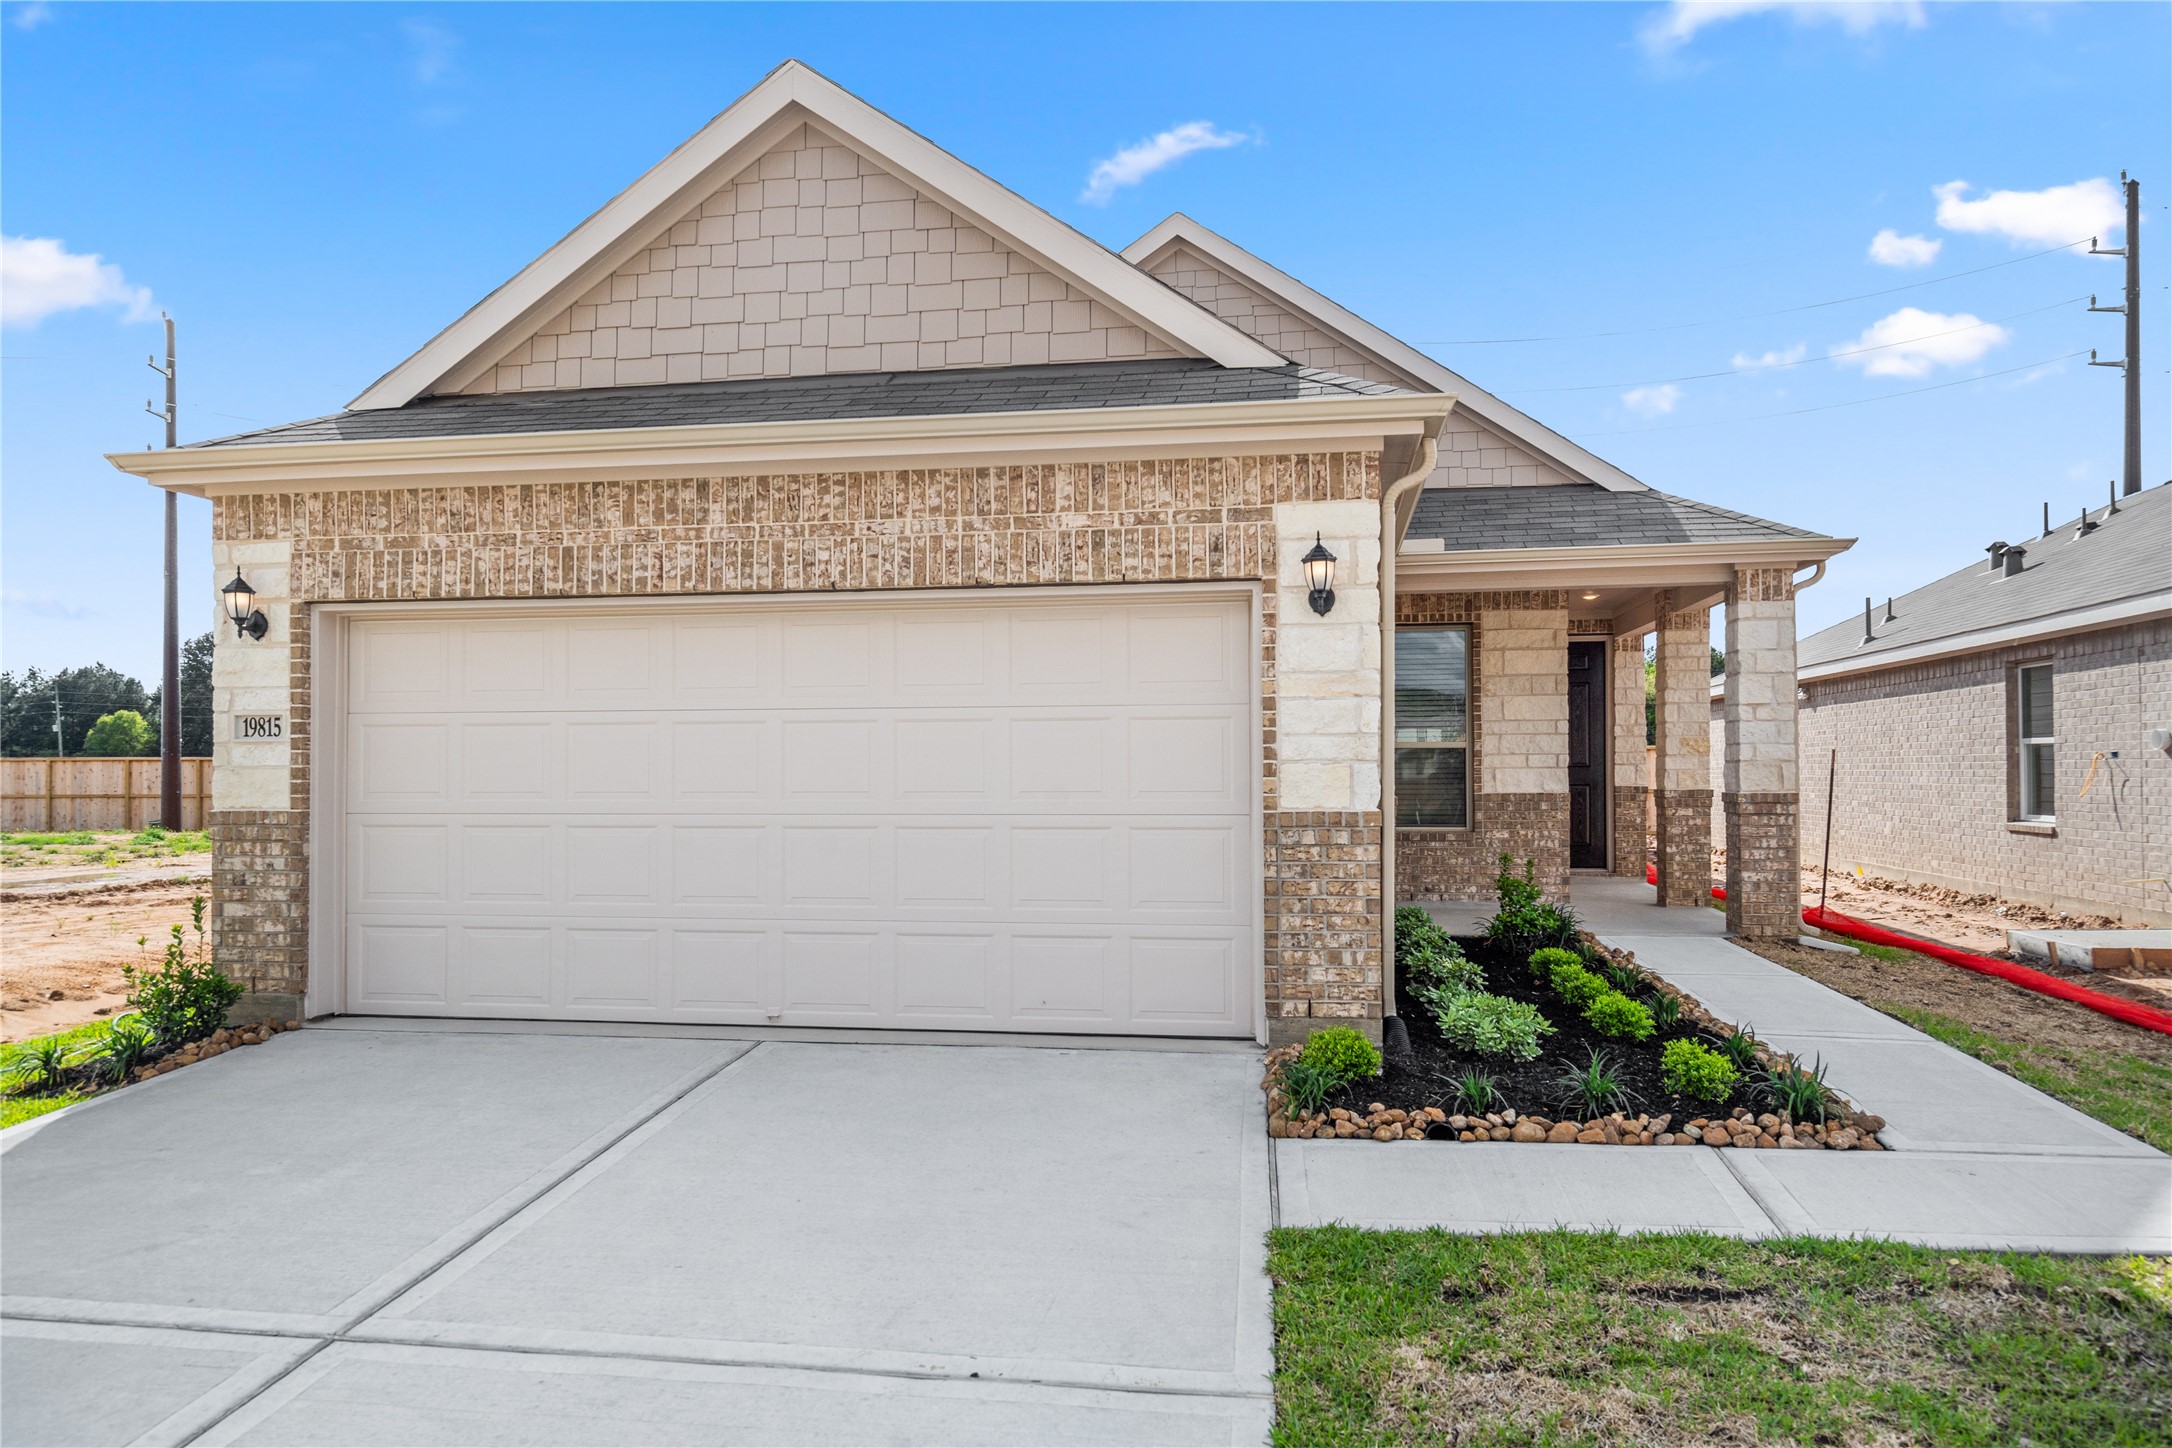 Welcome home to 19815 Corberry Park Lane located in Bauer Meadows and zoned to Waller ISD!